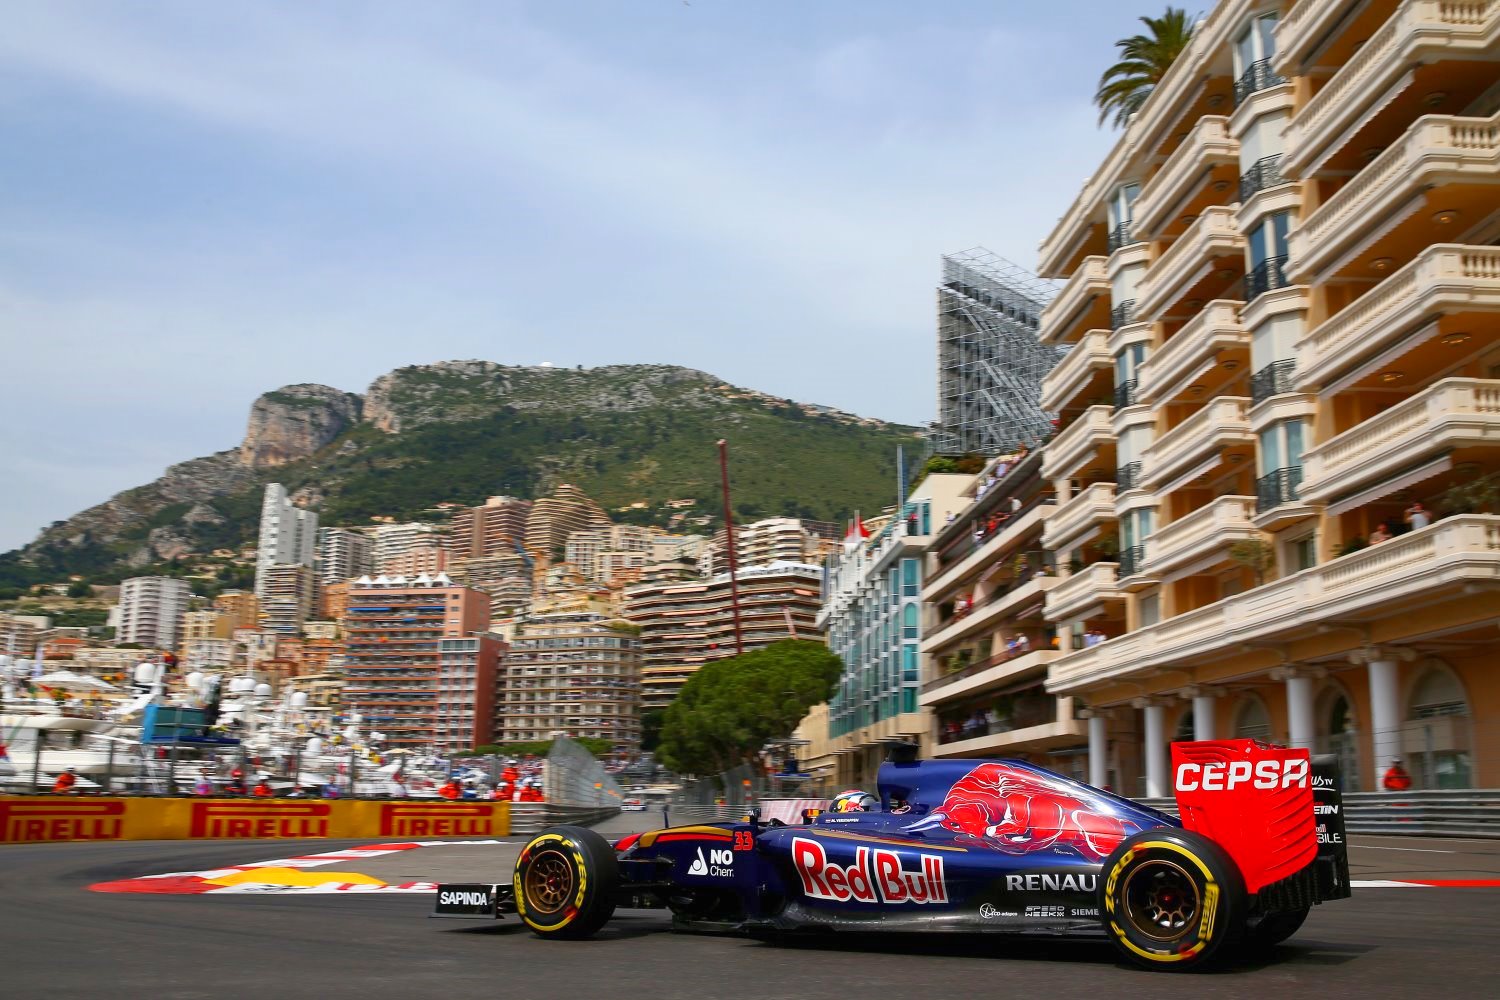 The Toro Rosso is a good car, but with Renault power it's nowhere